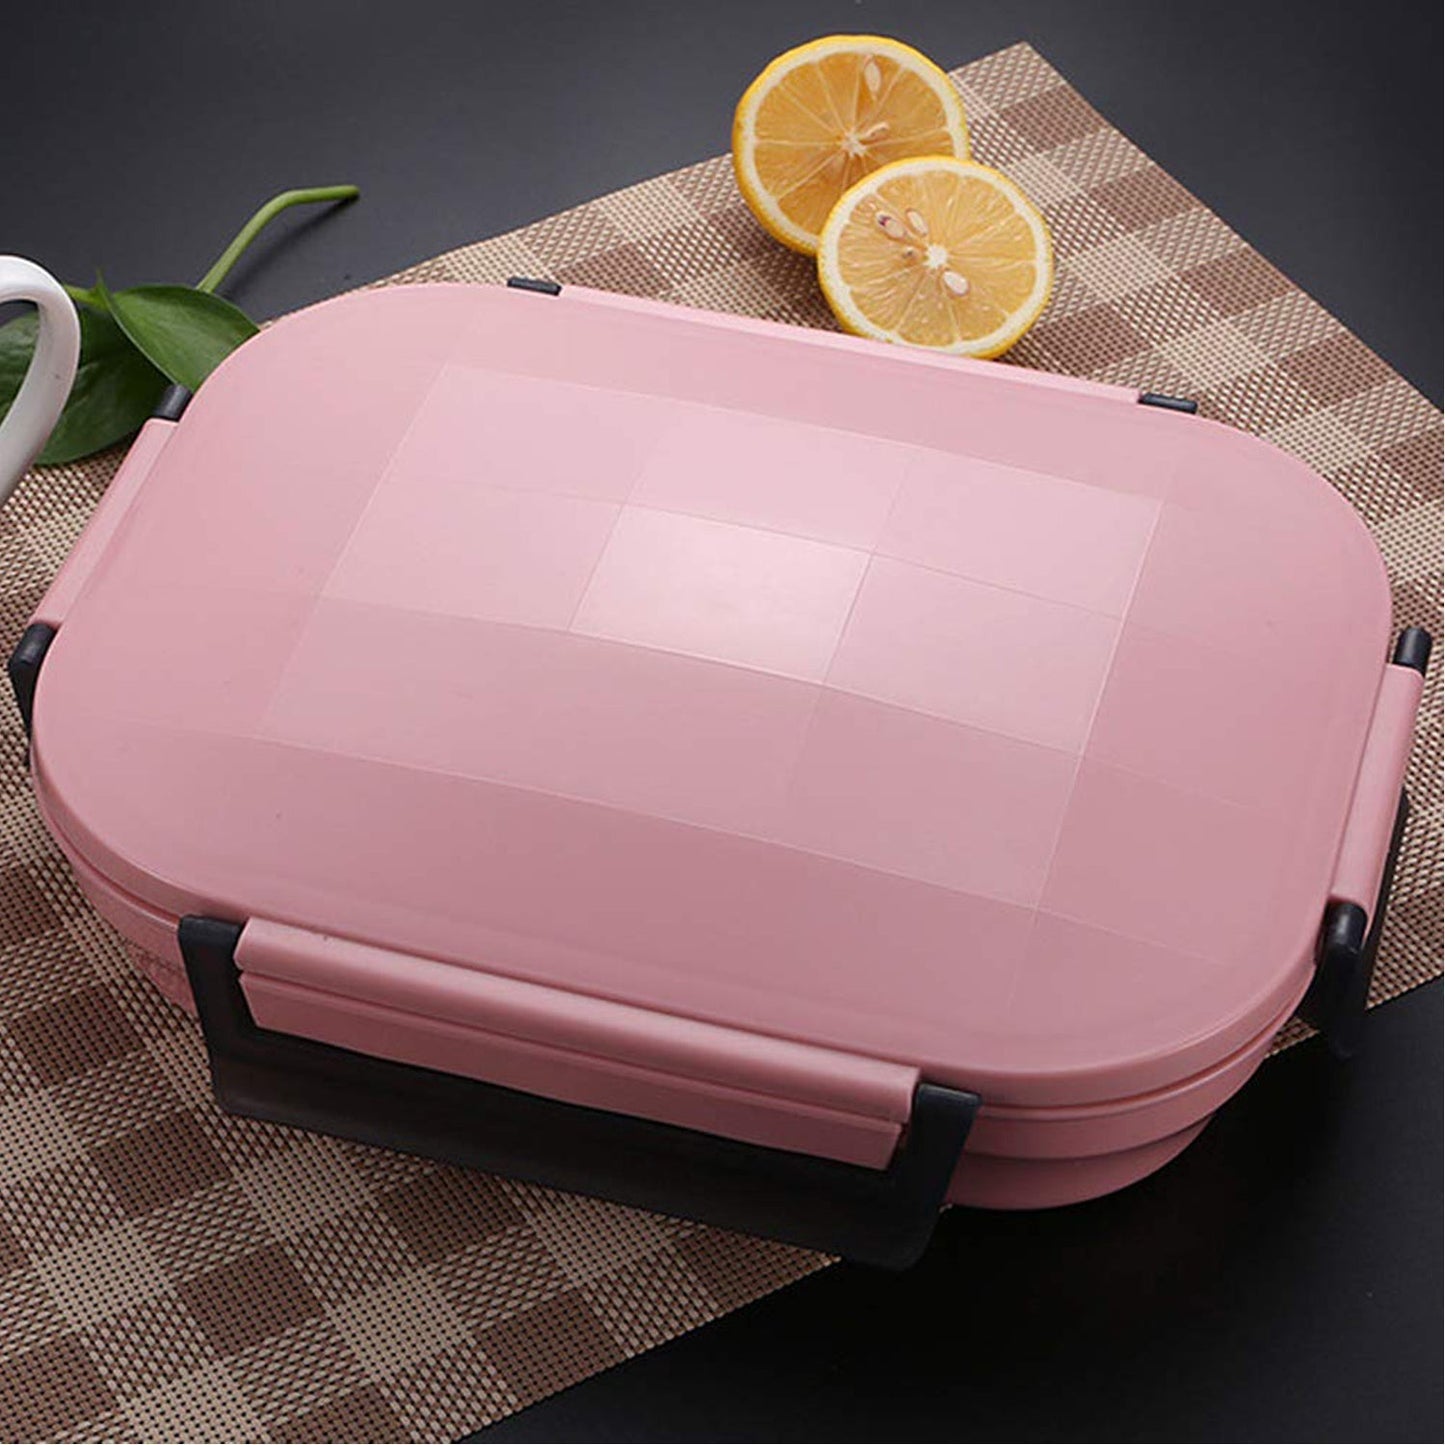 2975 Lunch Box for Kids and adults, Stainless Steel Lunch Box with 3 Compartments. 